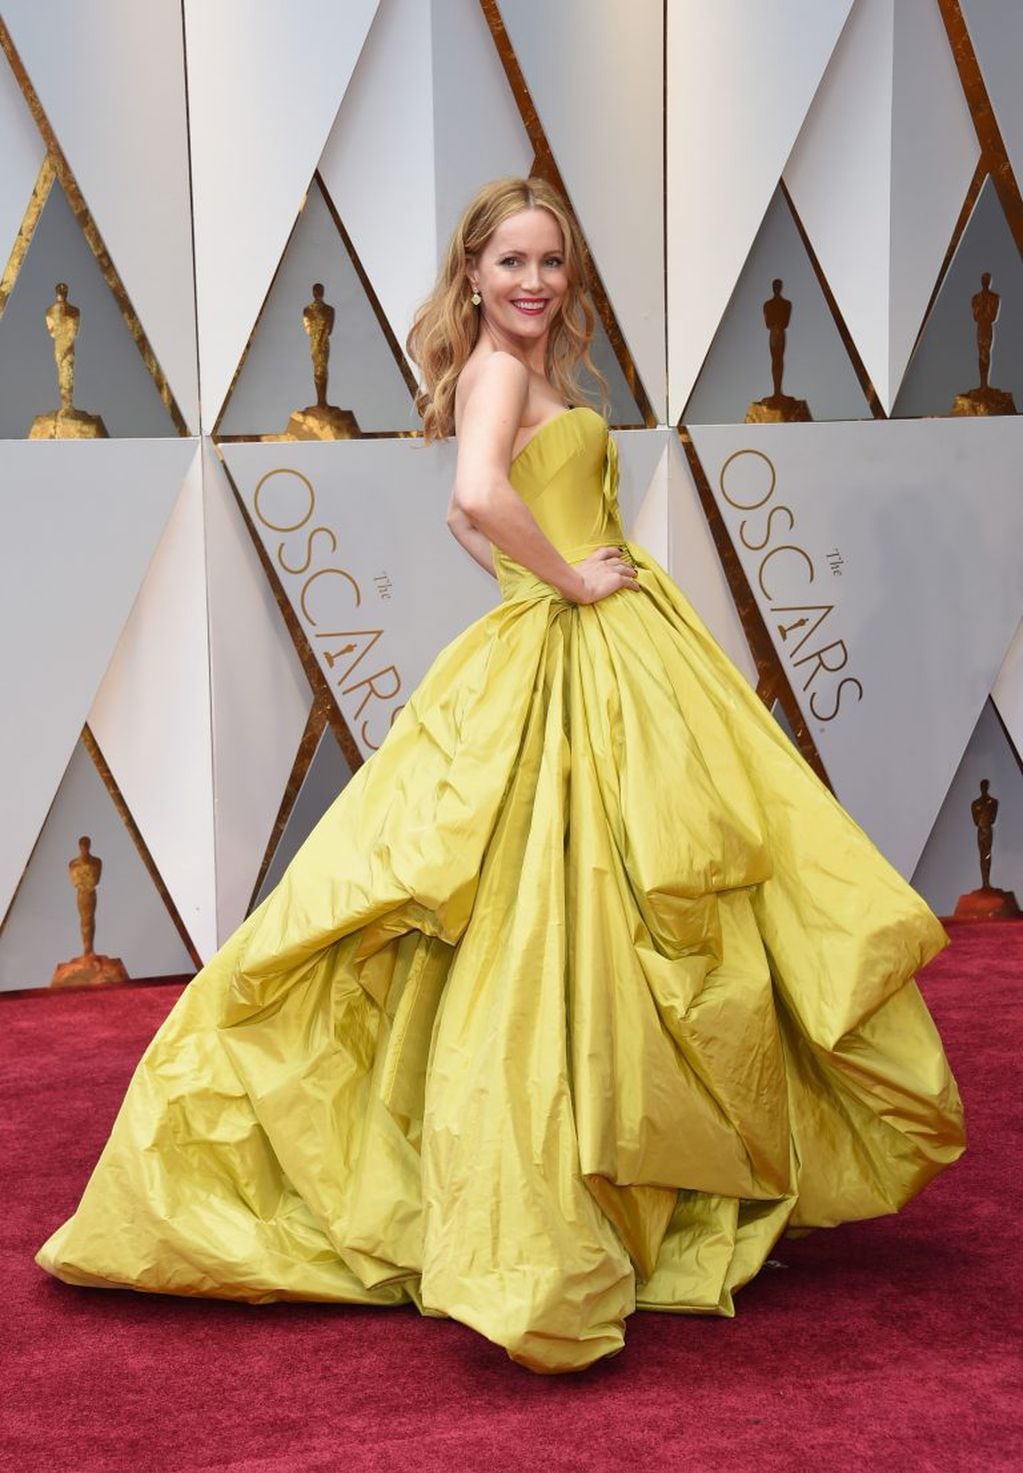 Leslie Mann arrives on the red carpet for the 89th Oscars on February 26, 2017 in Hollywood, California.  / AFP PHOTO / VALERIE MACON